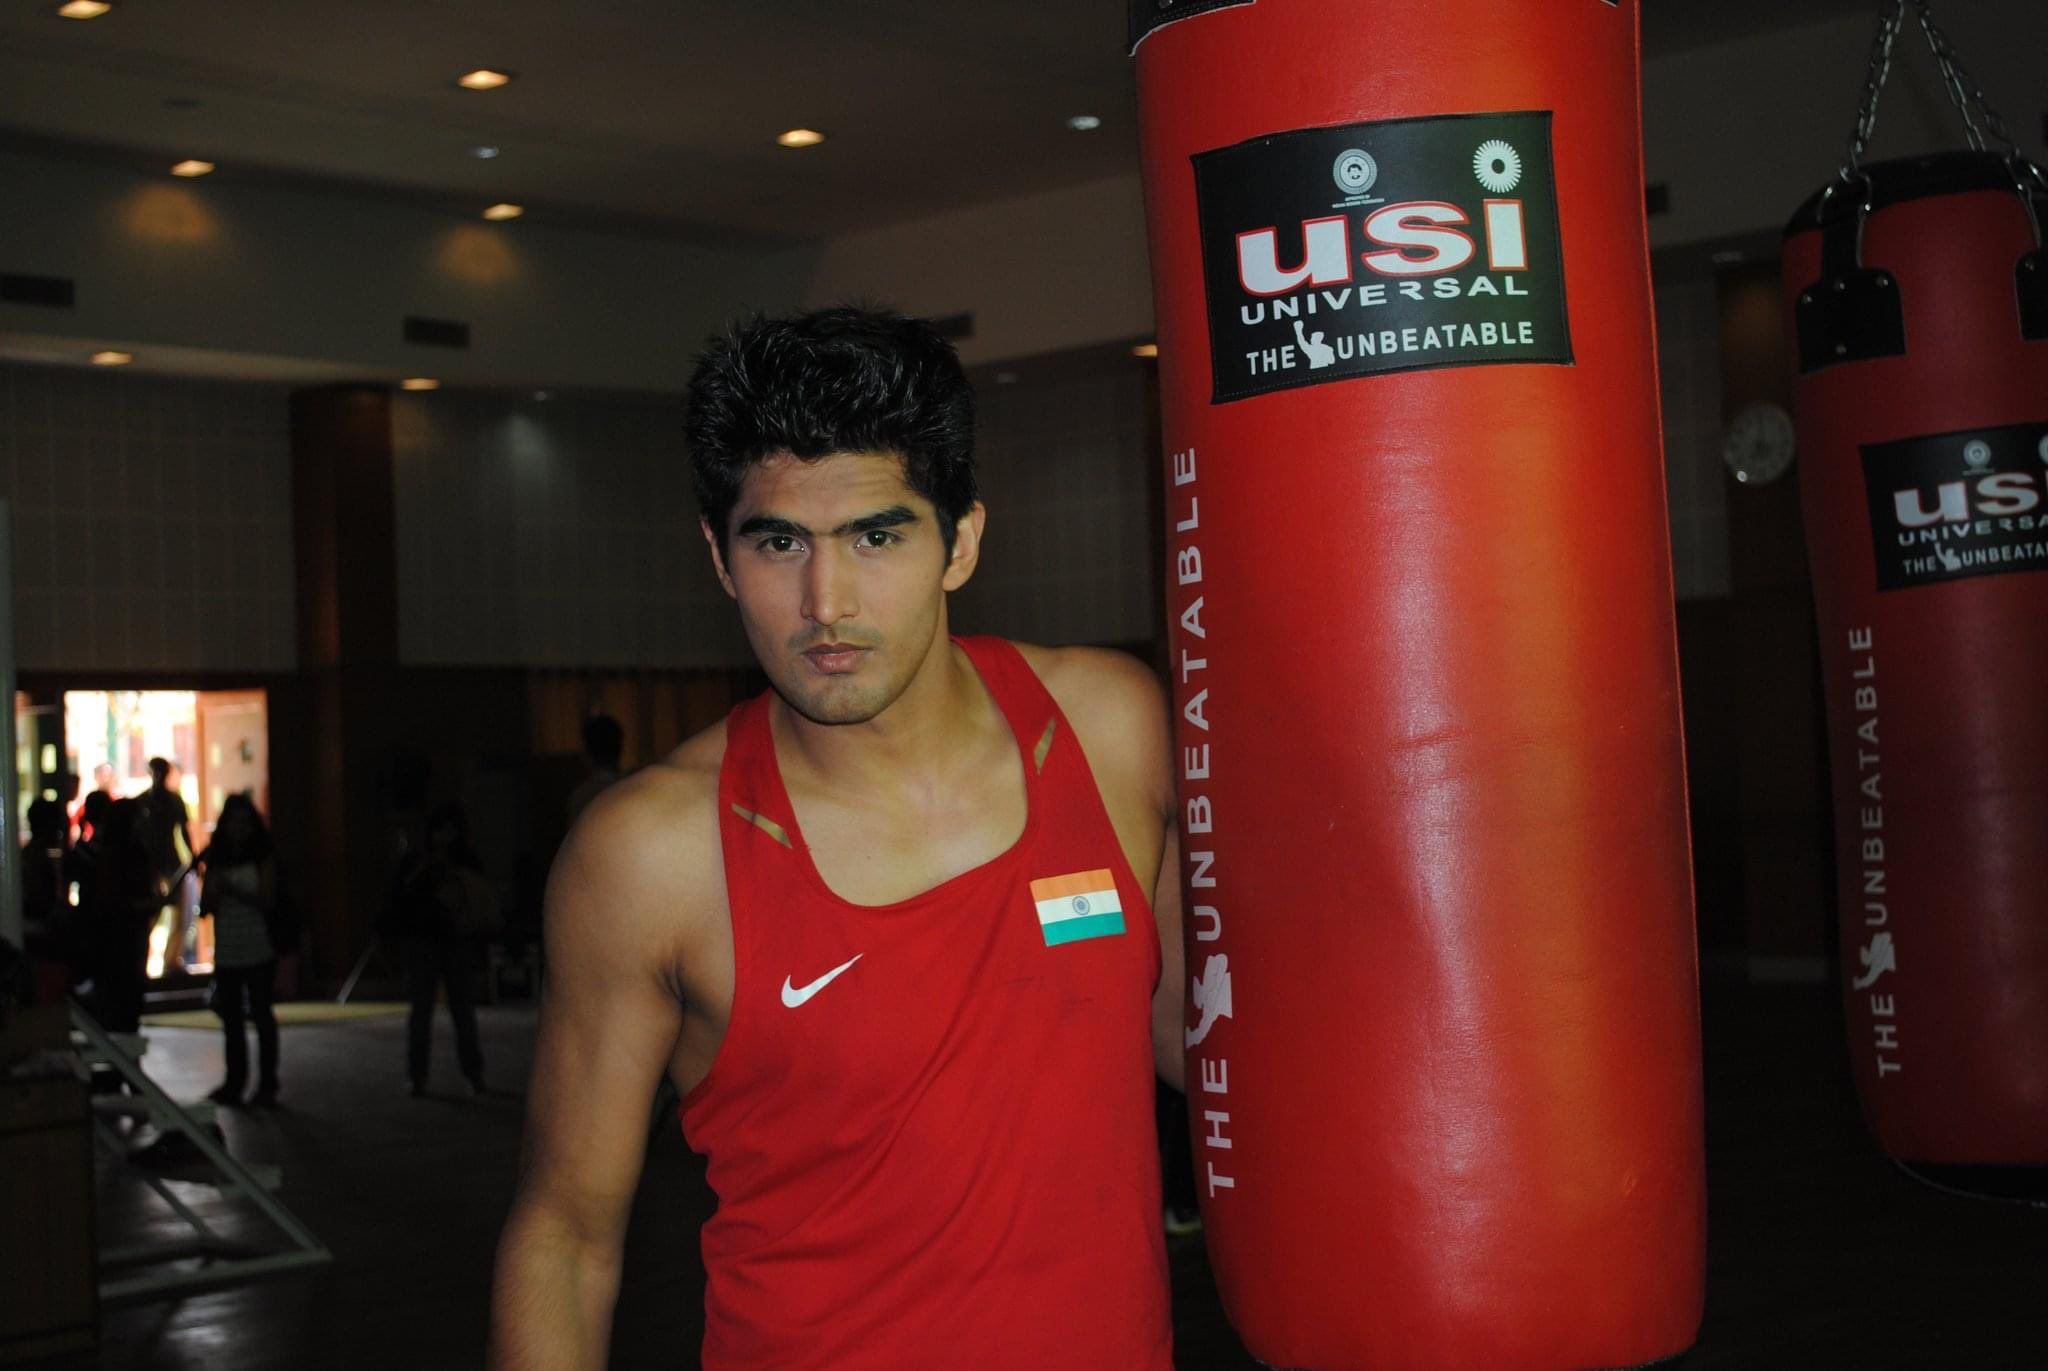 Vijender Singh returns to the ring: All you need to know